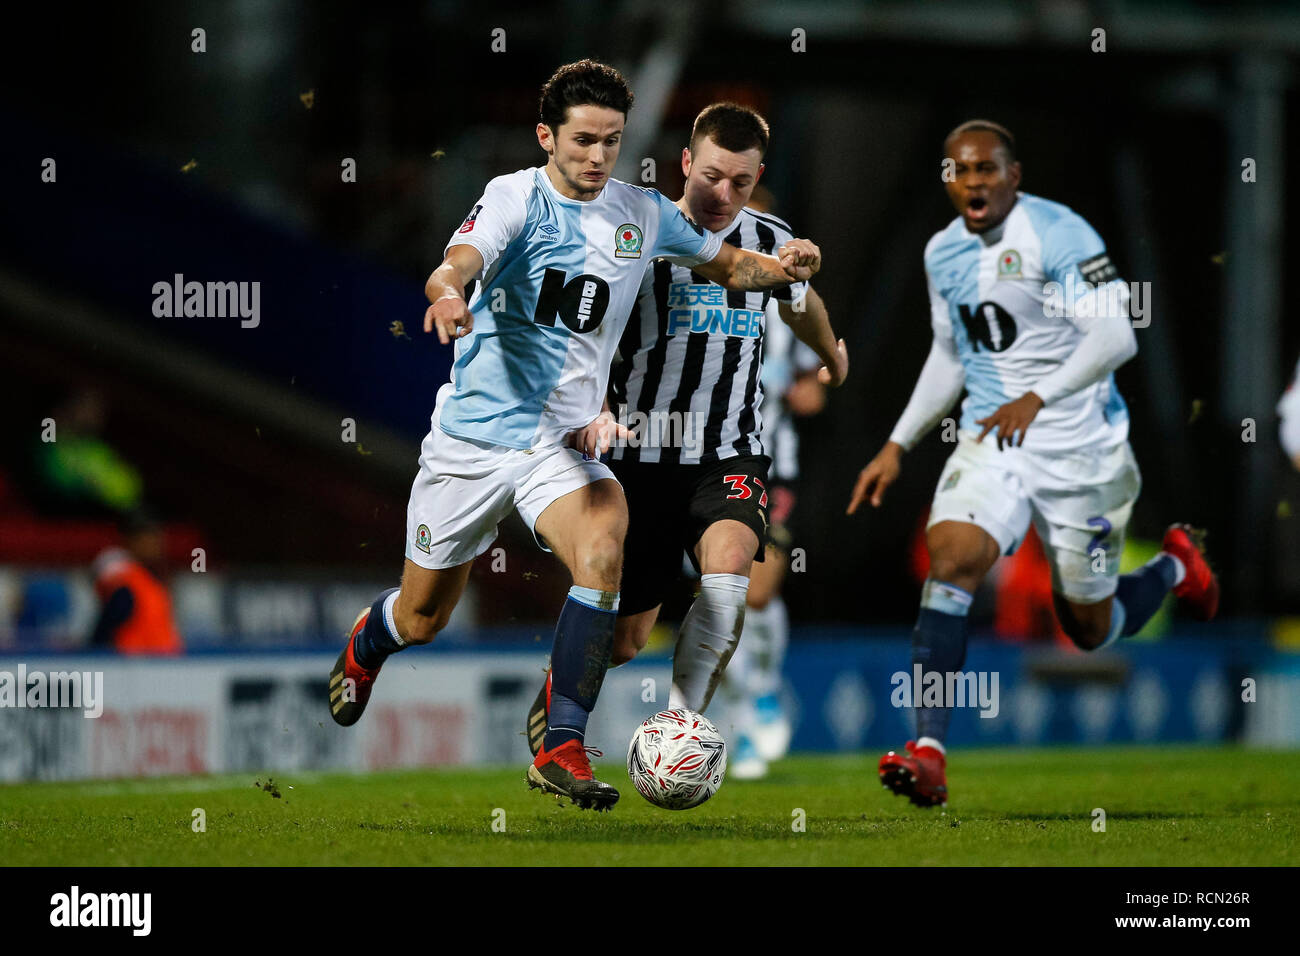 Blackburn, Lancashire, UK. 15th Jan 2019. Lewis Travis of Blackburn Rovers and Callum Roberts of Newcastle United during the FA Cup Third Round replay between Blackburn Rovers and Newcastle United at Ewood Park on January 15th 2019 in Blackburn, England. (Photo by Daniel Chesterton/phcimages.com) Credit: PHC Images/Alamy Live News Stock Photo